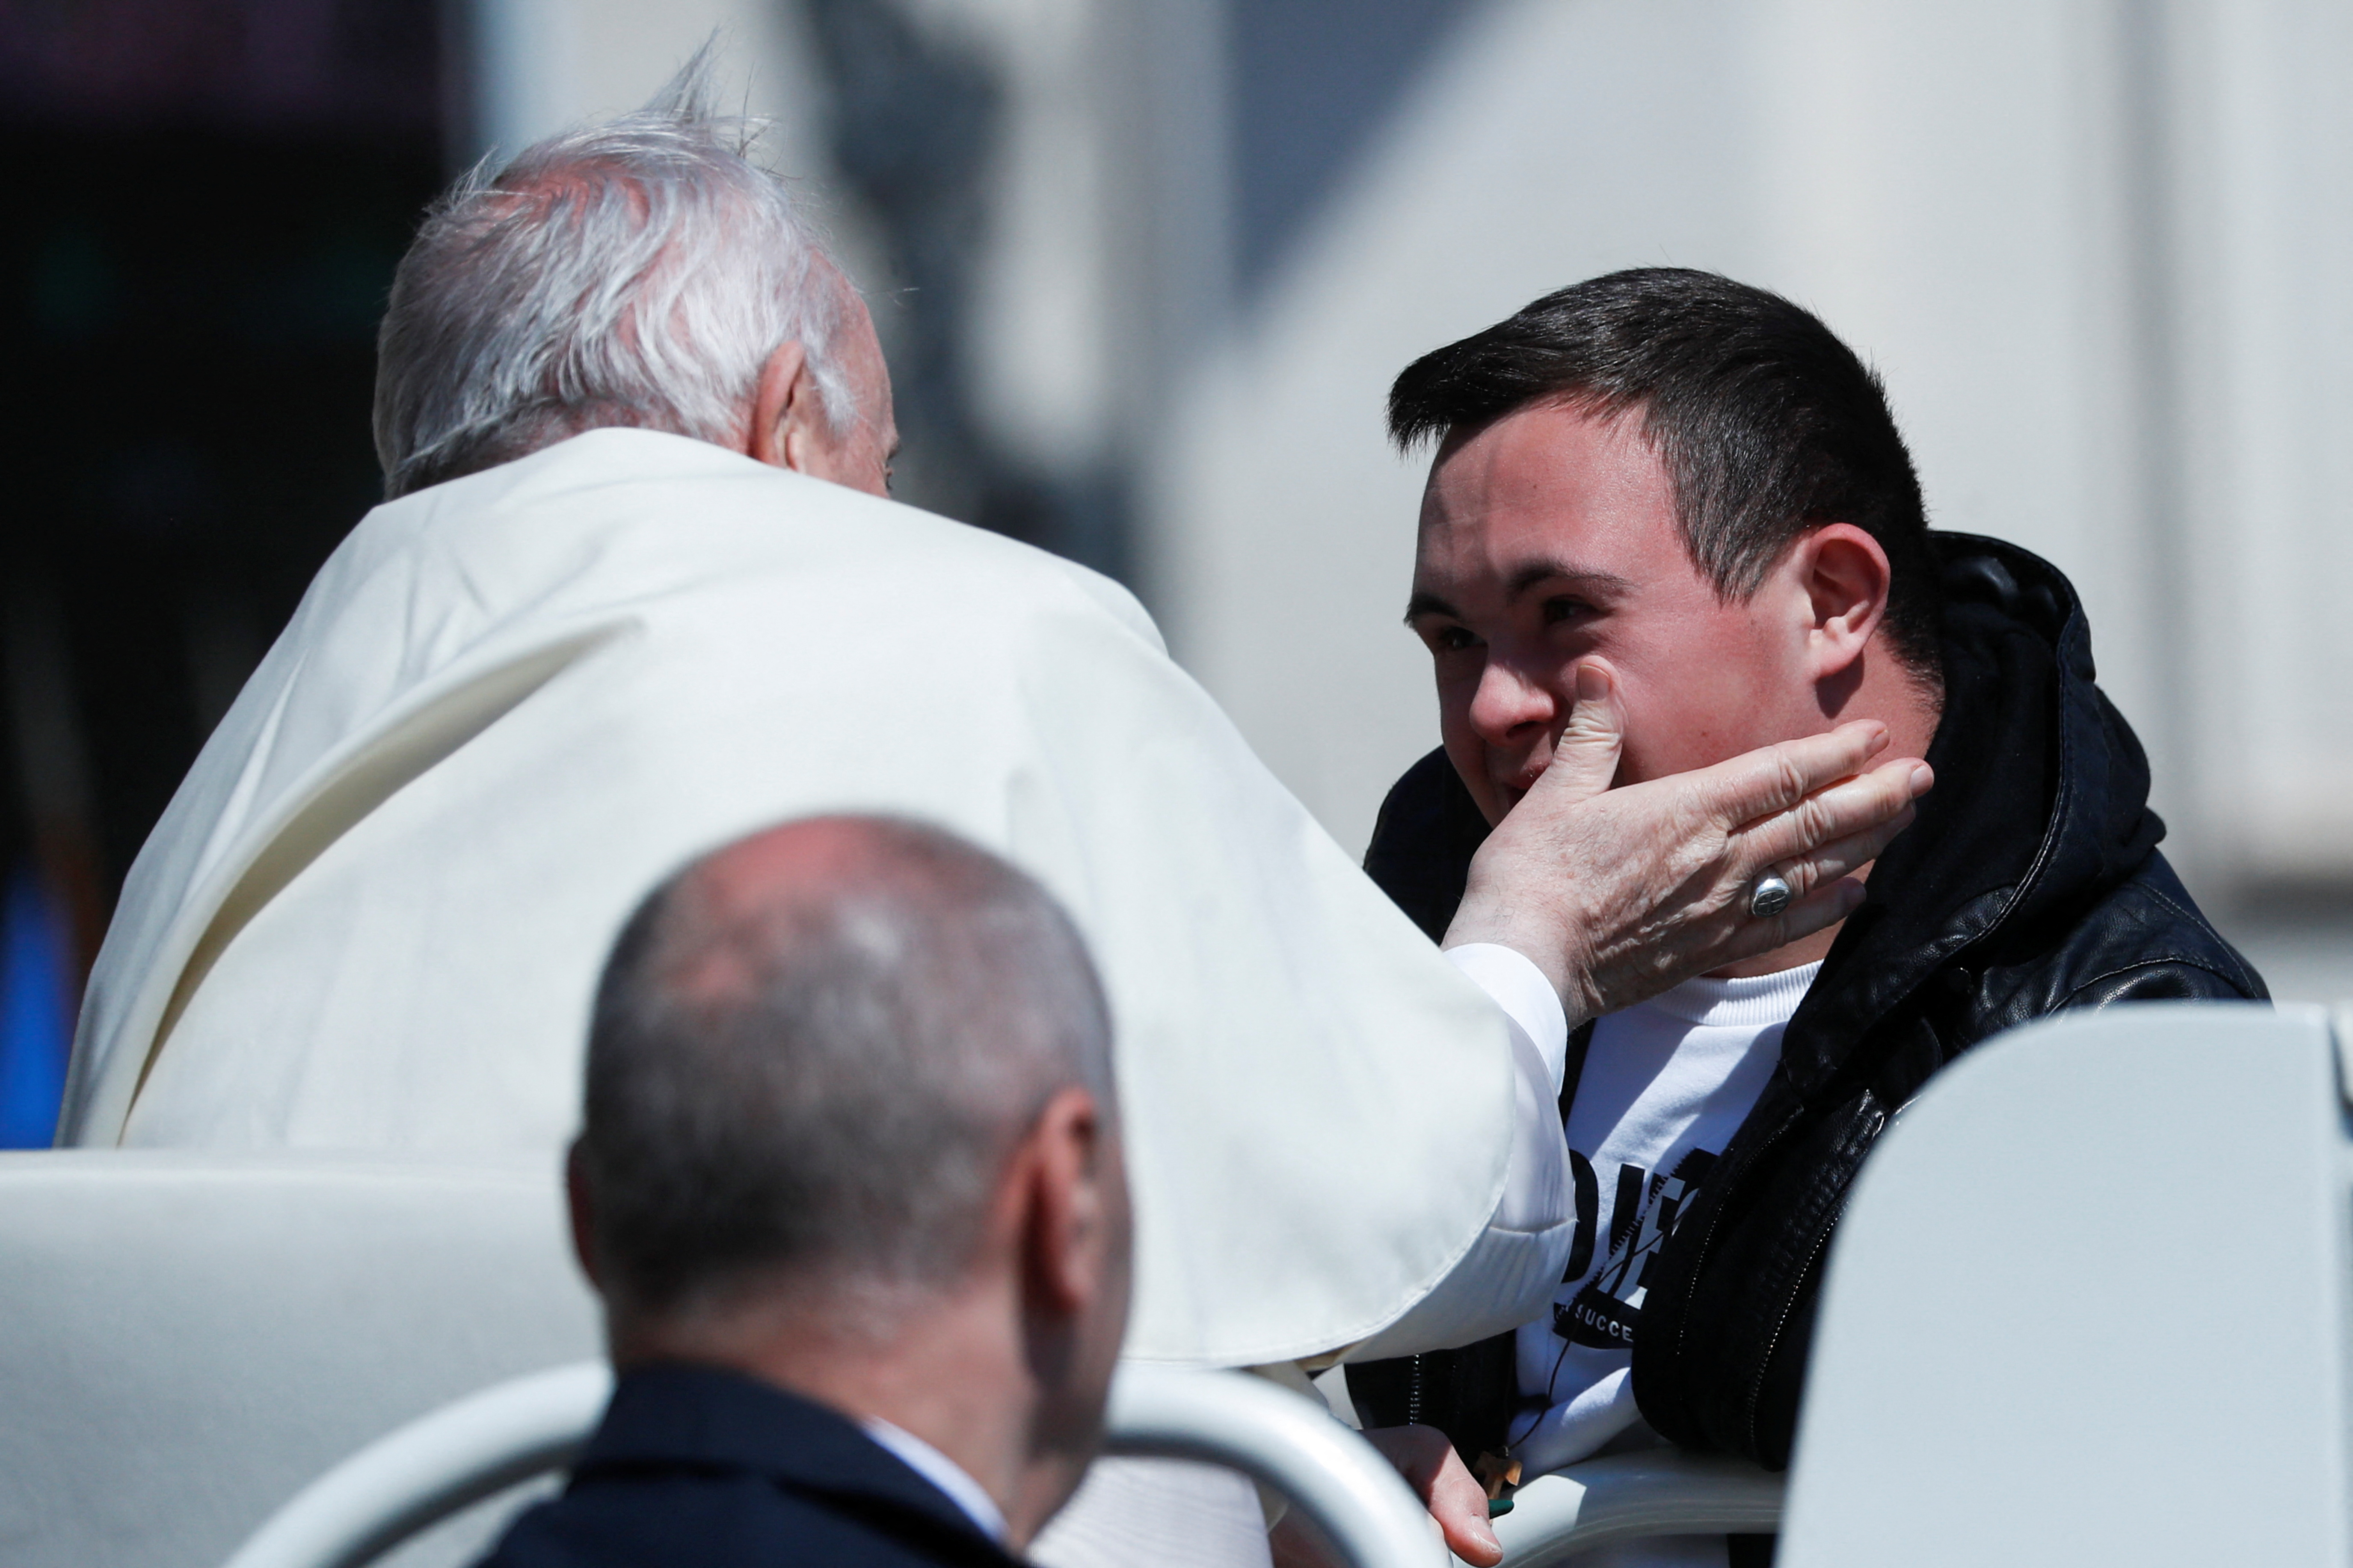 Pope Francis blesses a man with Down syndrome from his Popemobile, after celebrating Easter Mass in St. Peter's Square at the Vatican, April 17, 2022. REUTERS/Yara Nardi